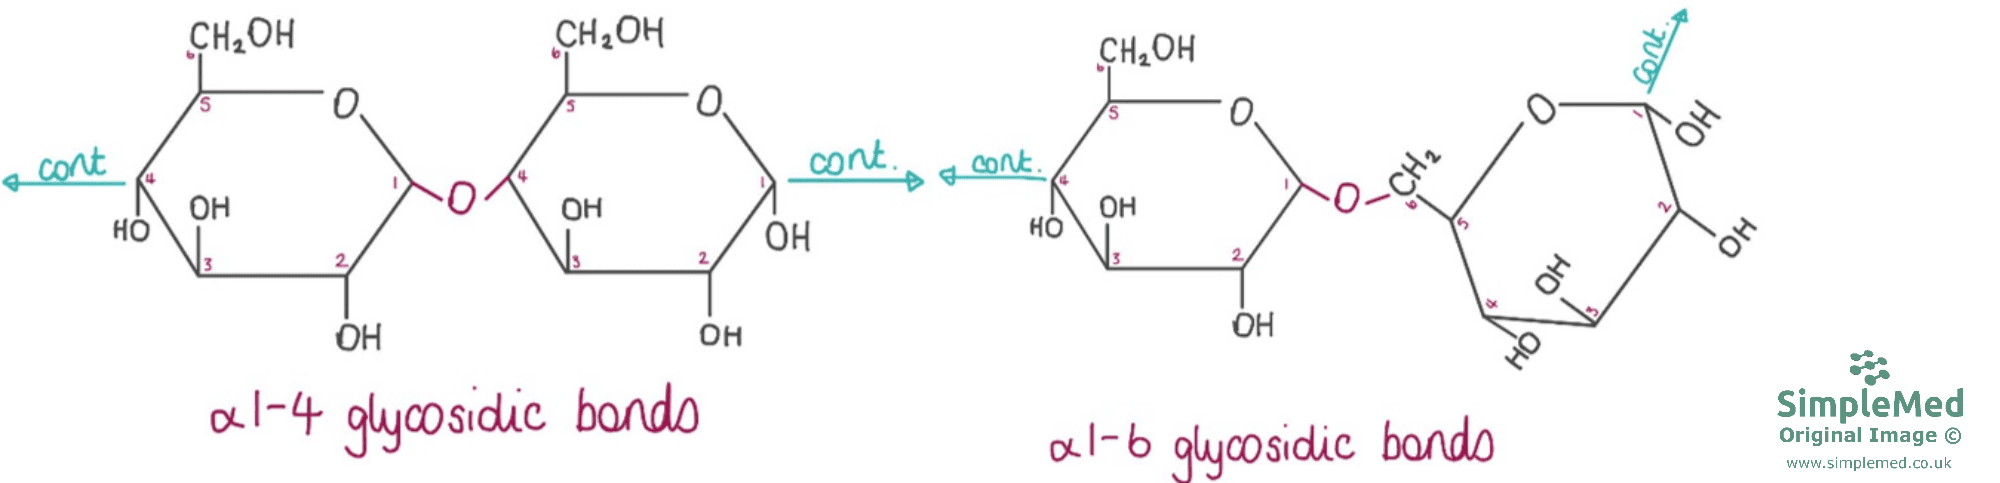 Glycogen Structure and Glycosidic Bonds SimpleMed